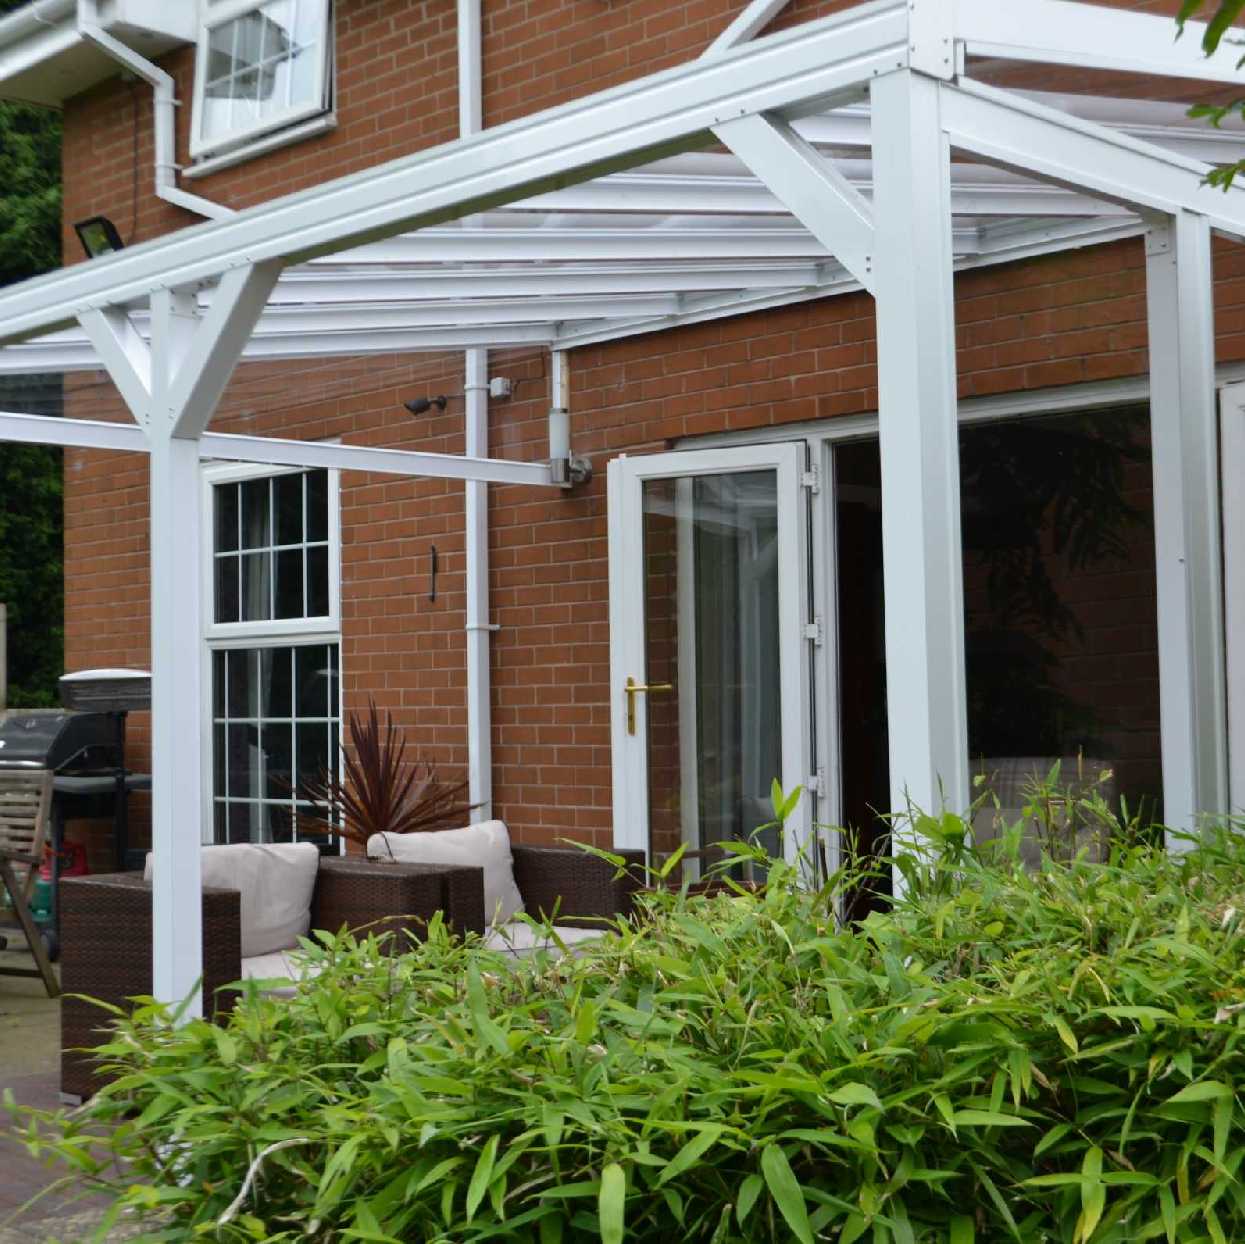 Omega Smart Lean-To Canopy, White UNGLAZED for 6mm Glazing - 9.8m (W) x 1.5m (P), (5) Supporting Posts from Omega Build